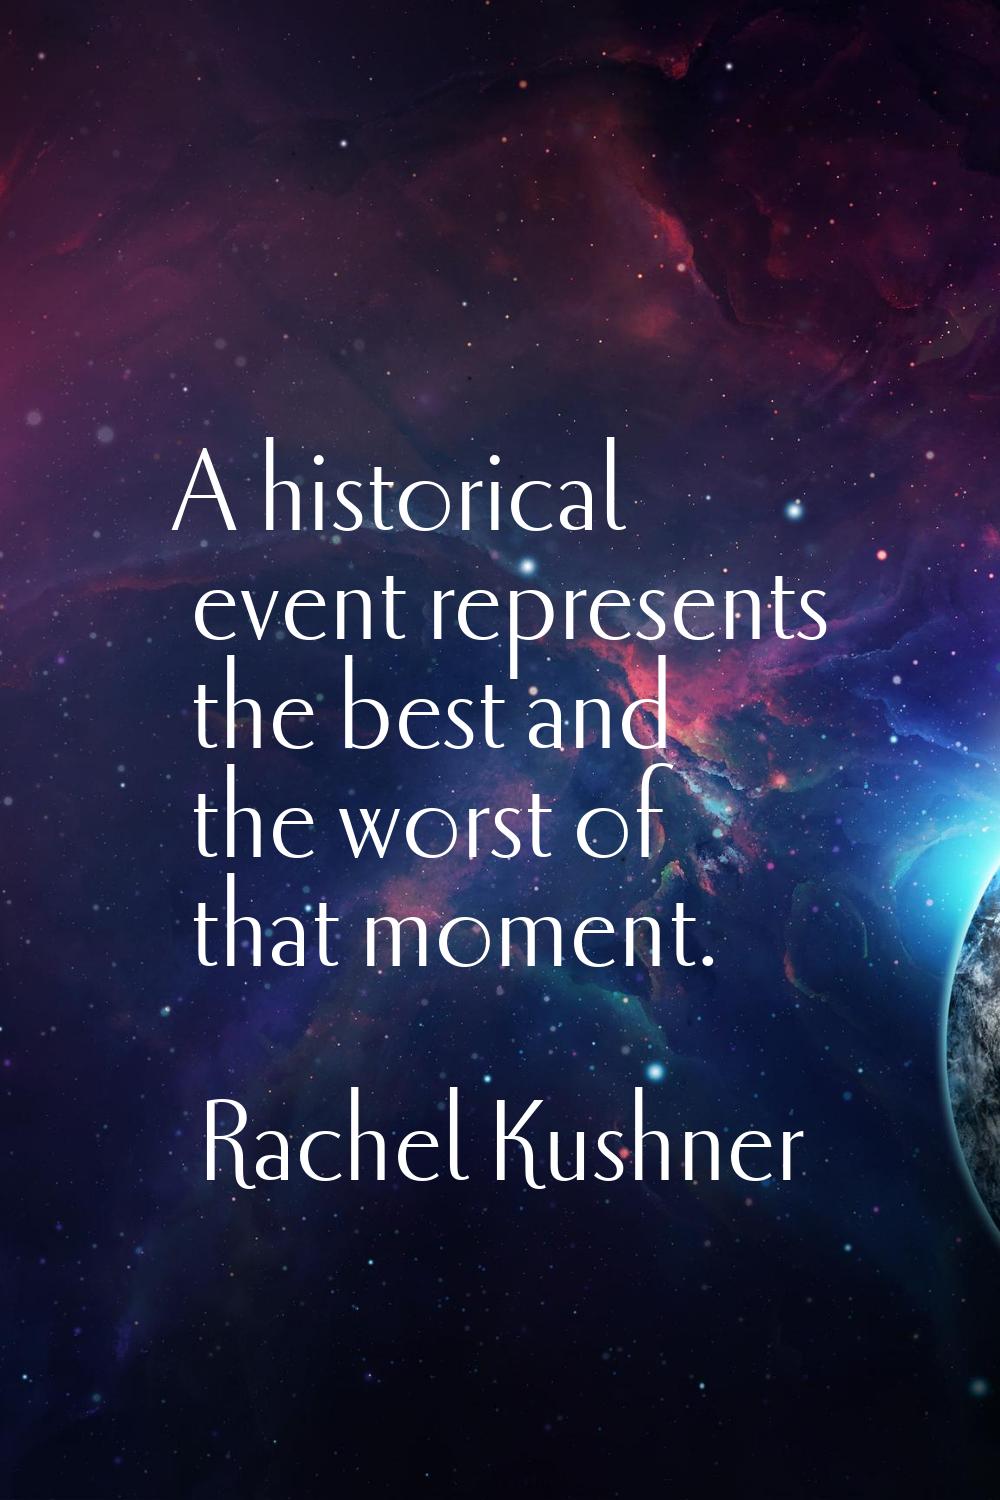 A historical event represents the best and the worst of that moment.